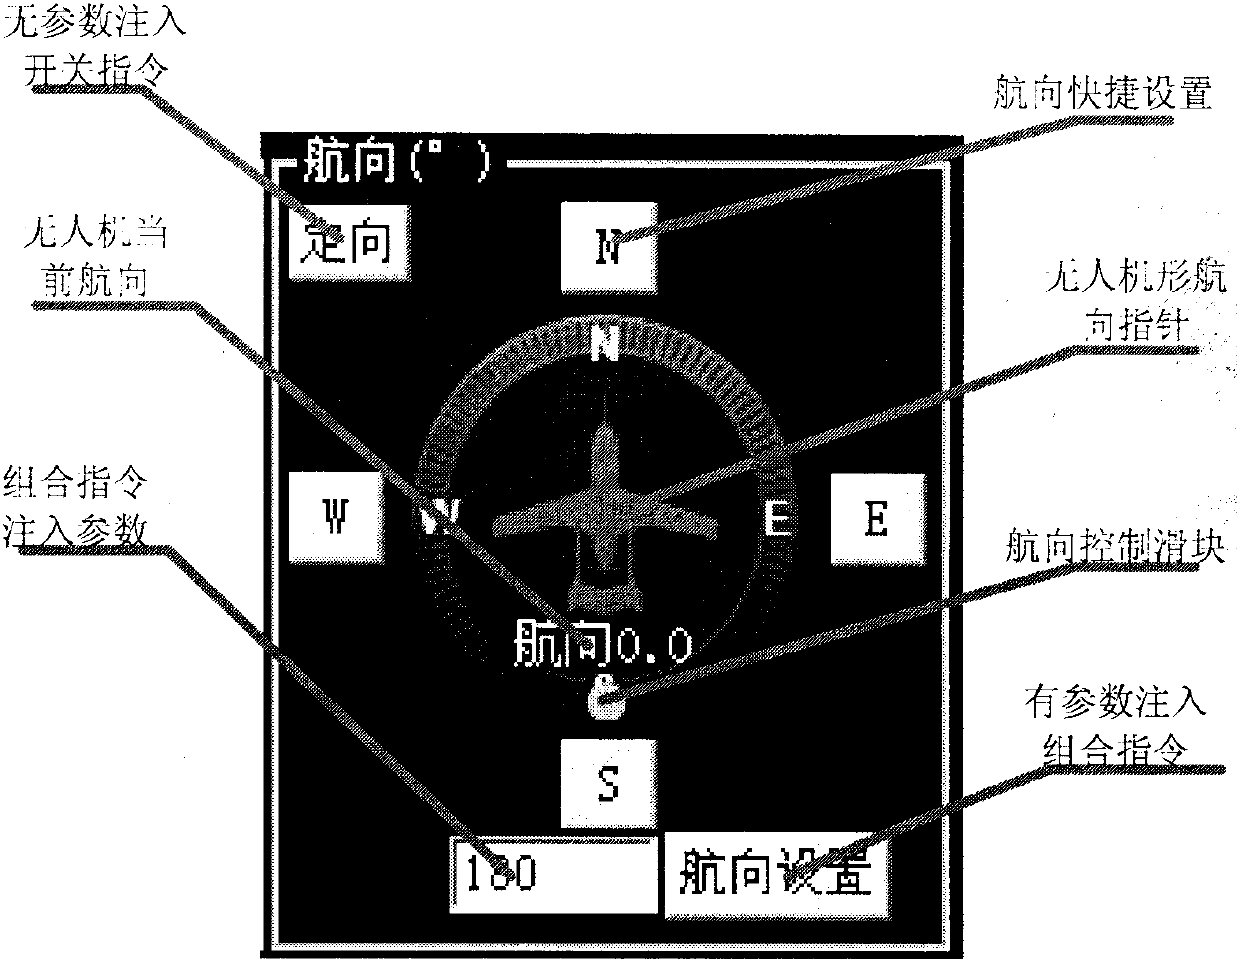 A method for making a compact display-control integrated control in a UAV ground control station